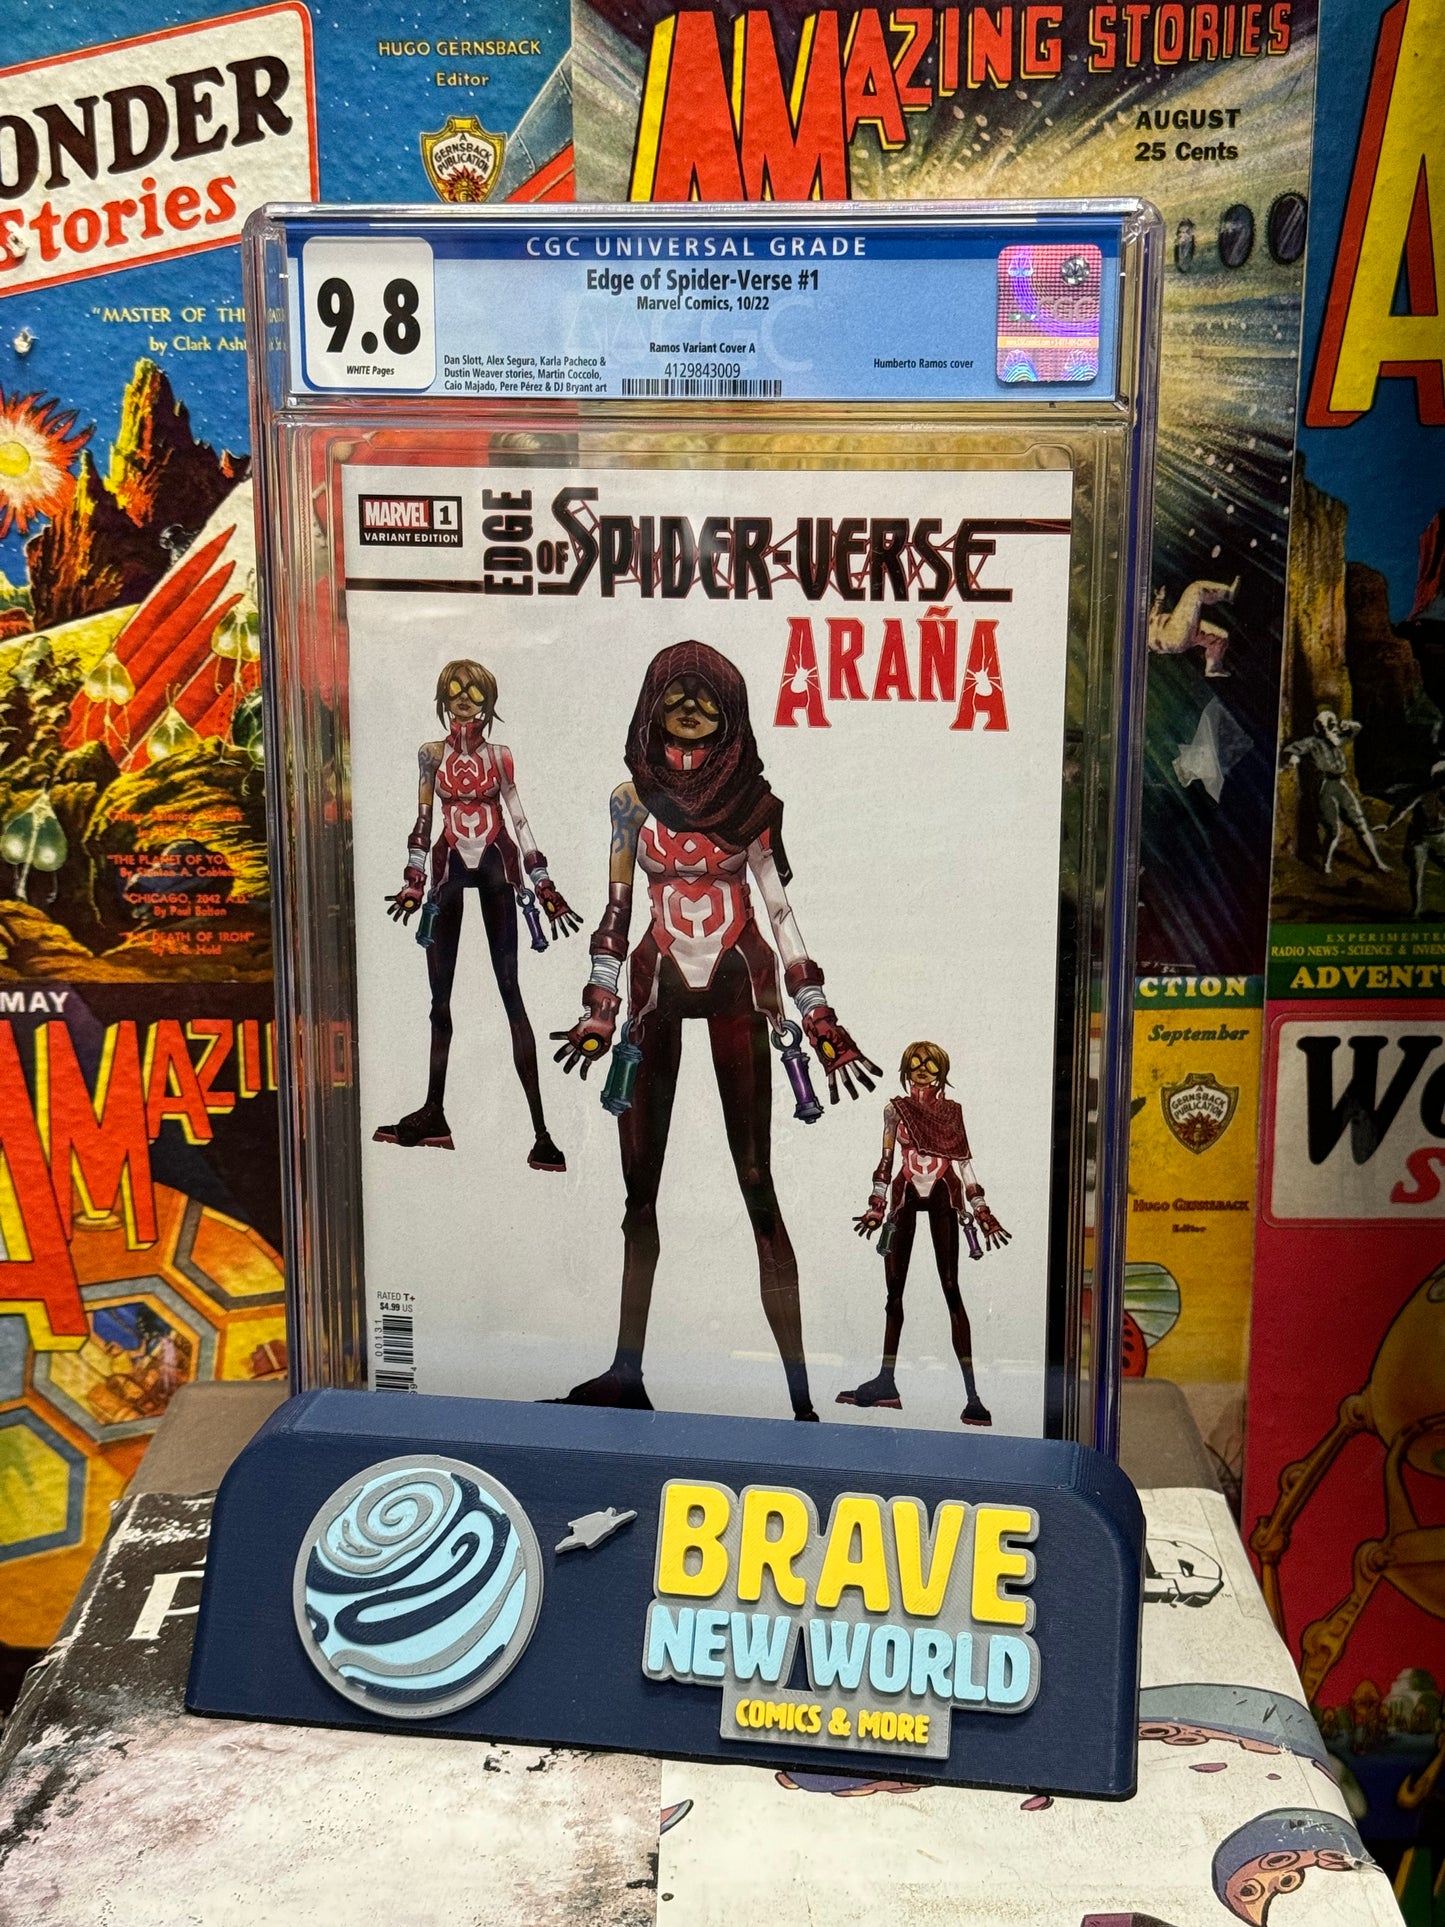 Edge of Spider-Verse #1 CGC Graded 9.8 Ramos Variant Cover A